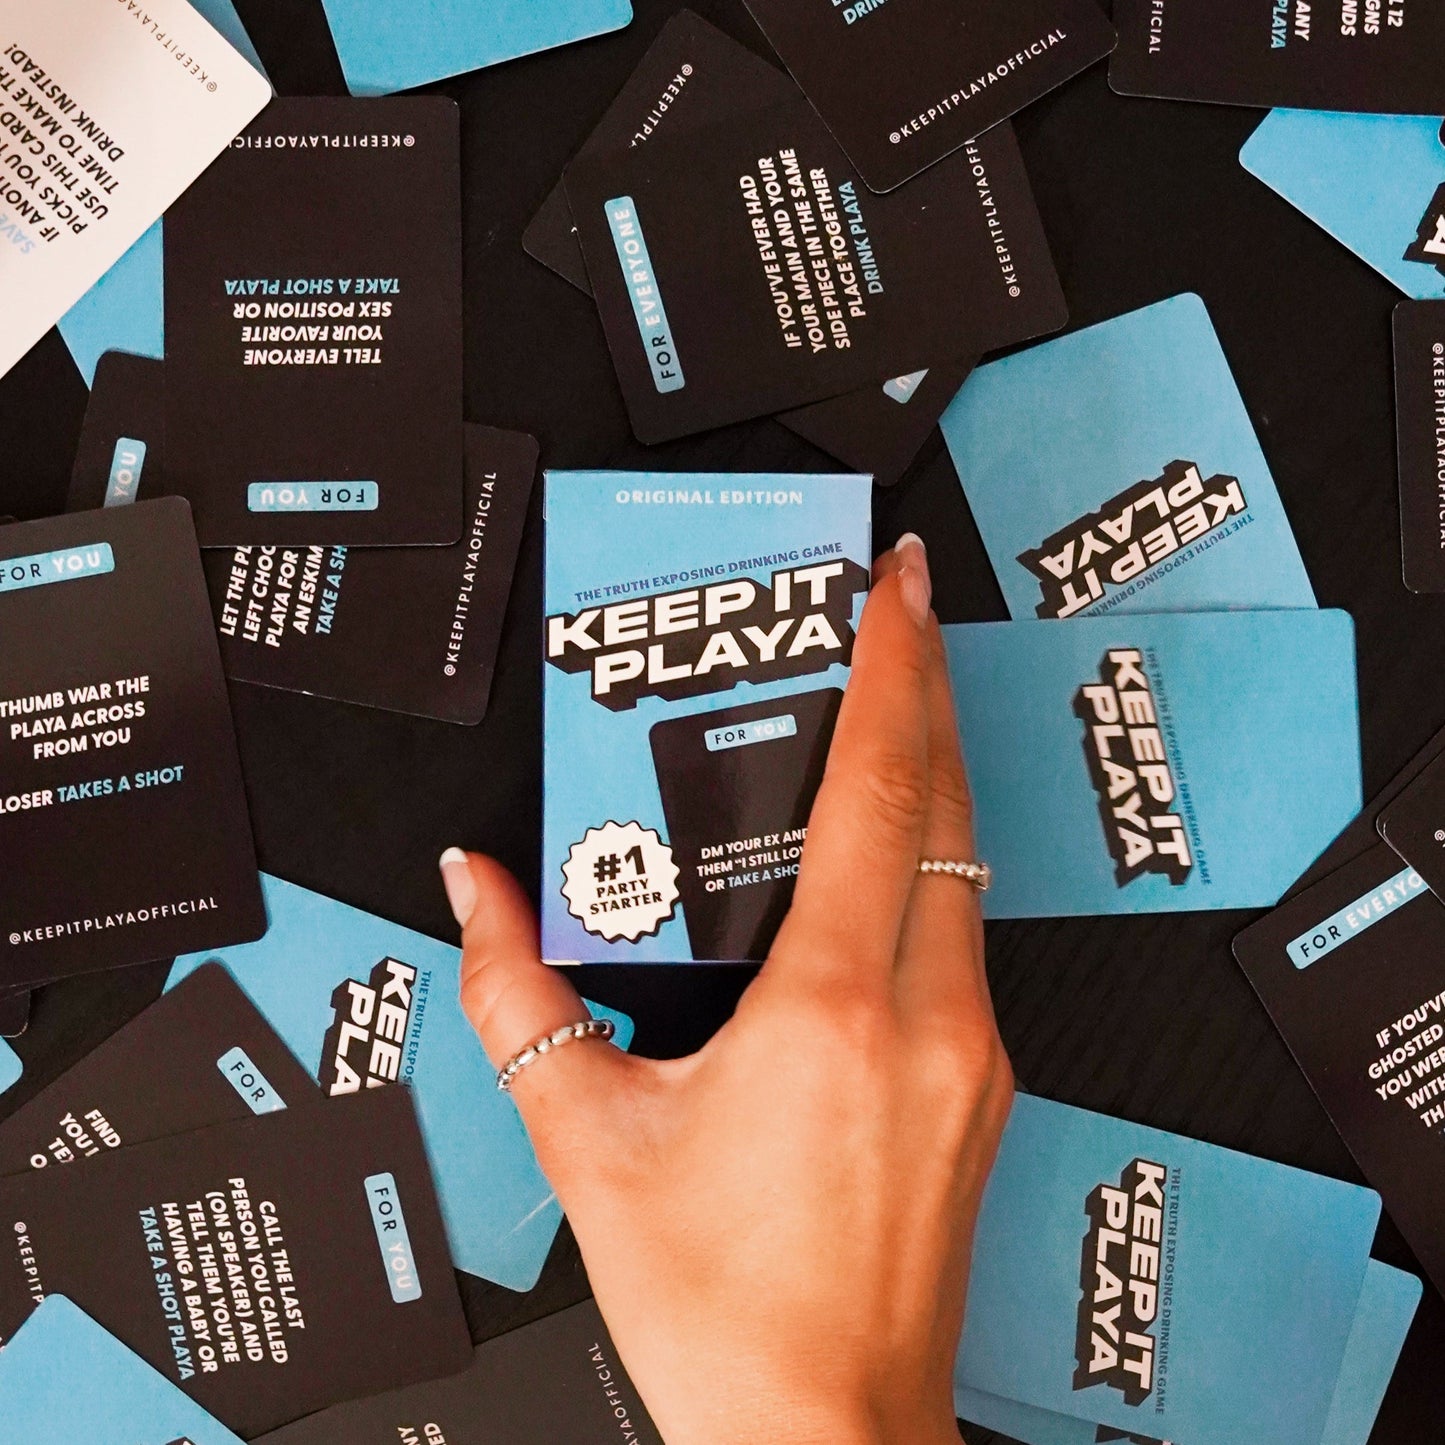 image of Keep It Playa original edition front of box being held by a hand with cards spread on table